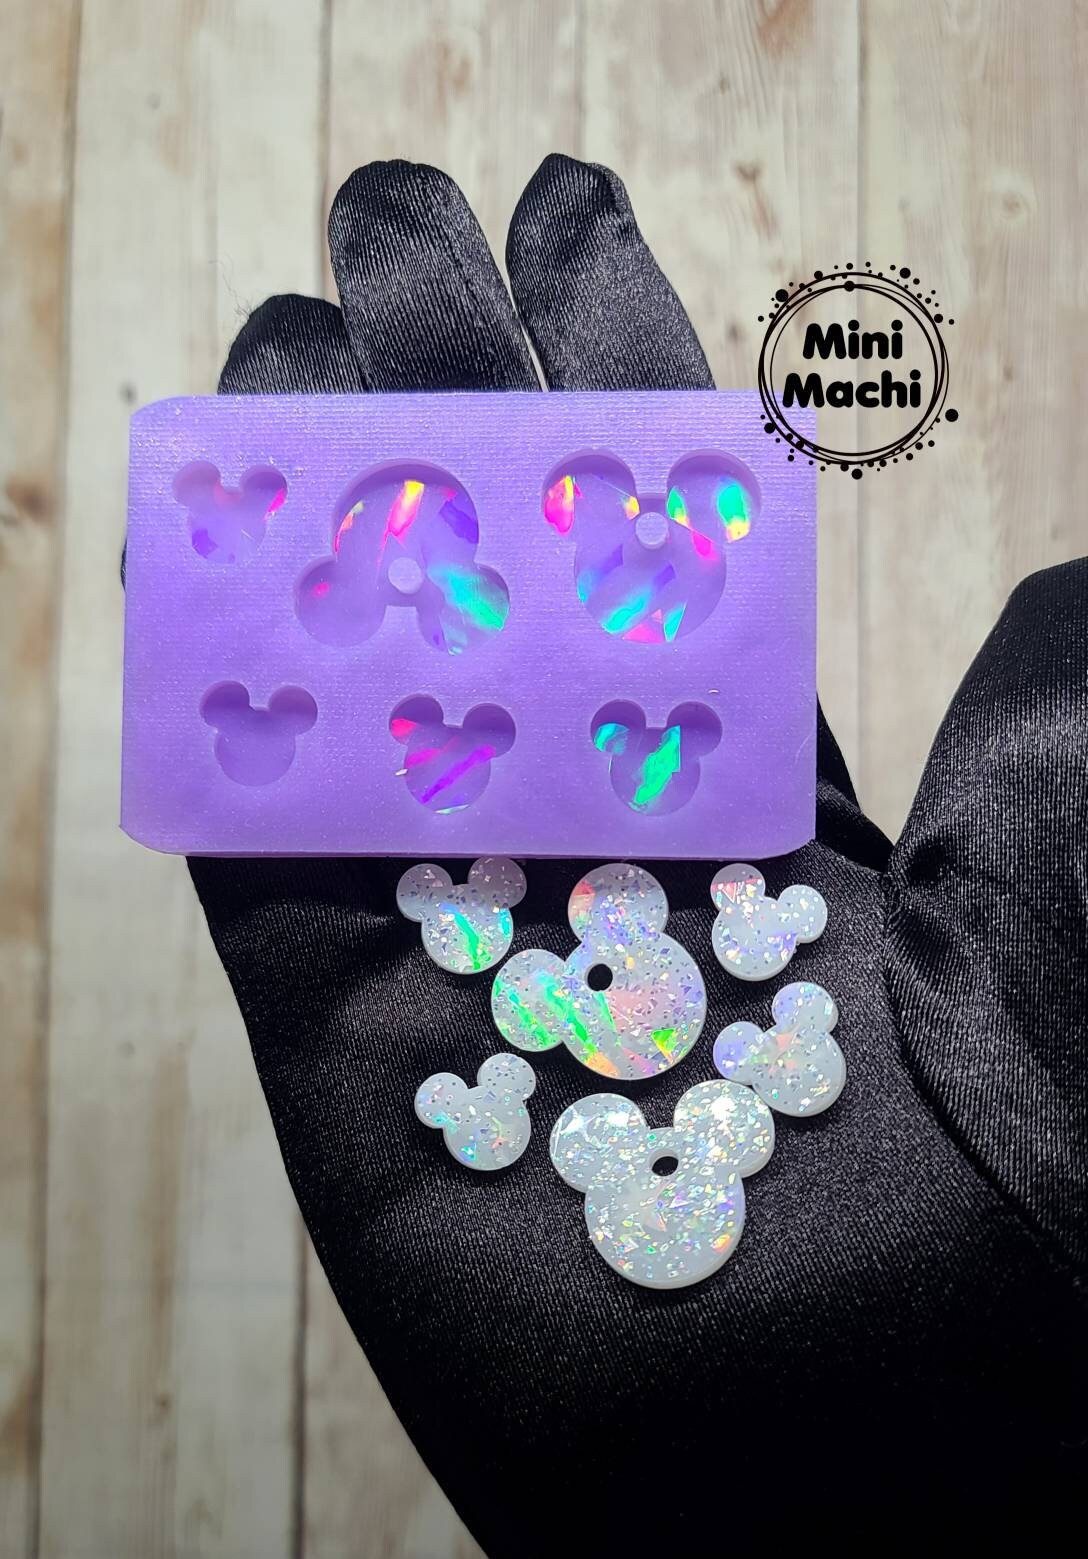 Holographic Silicone Film Resin Accessories – IntoResin